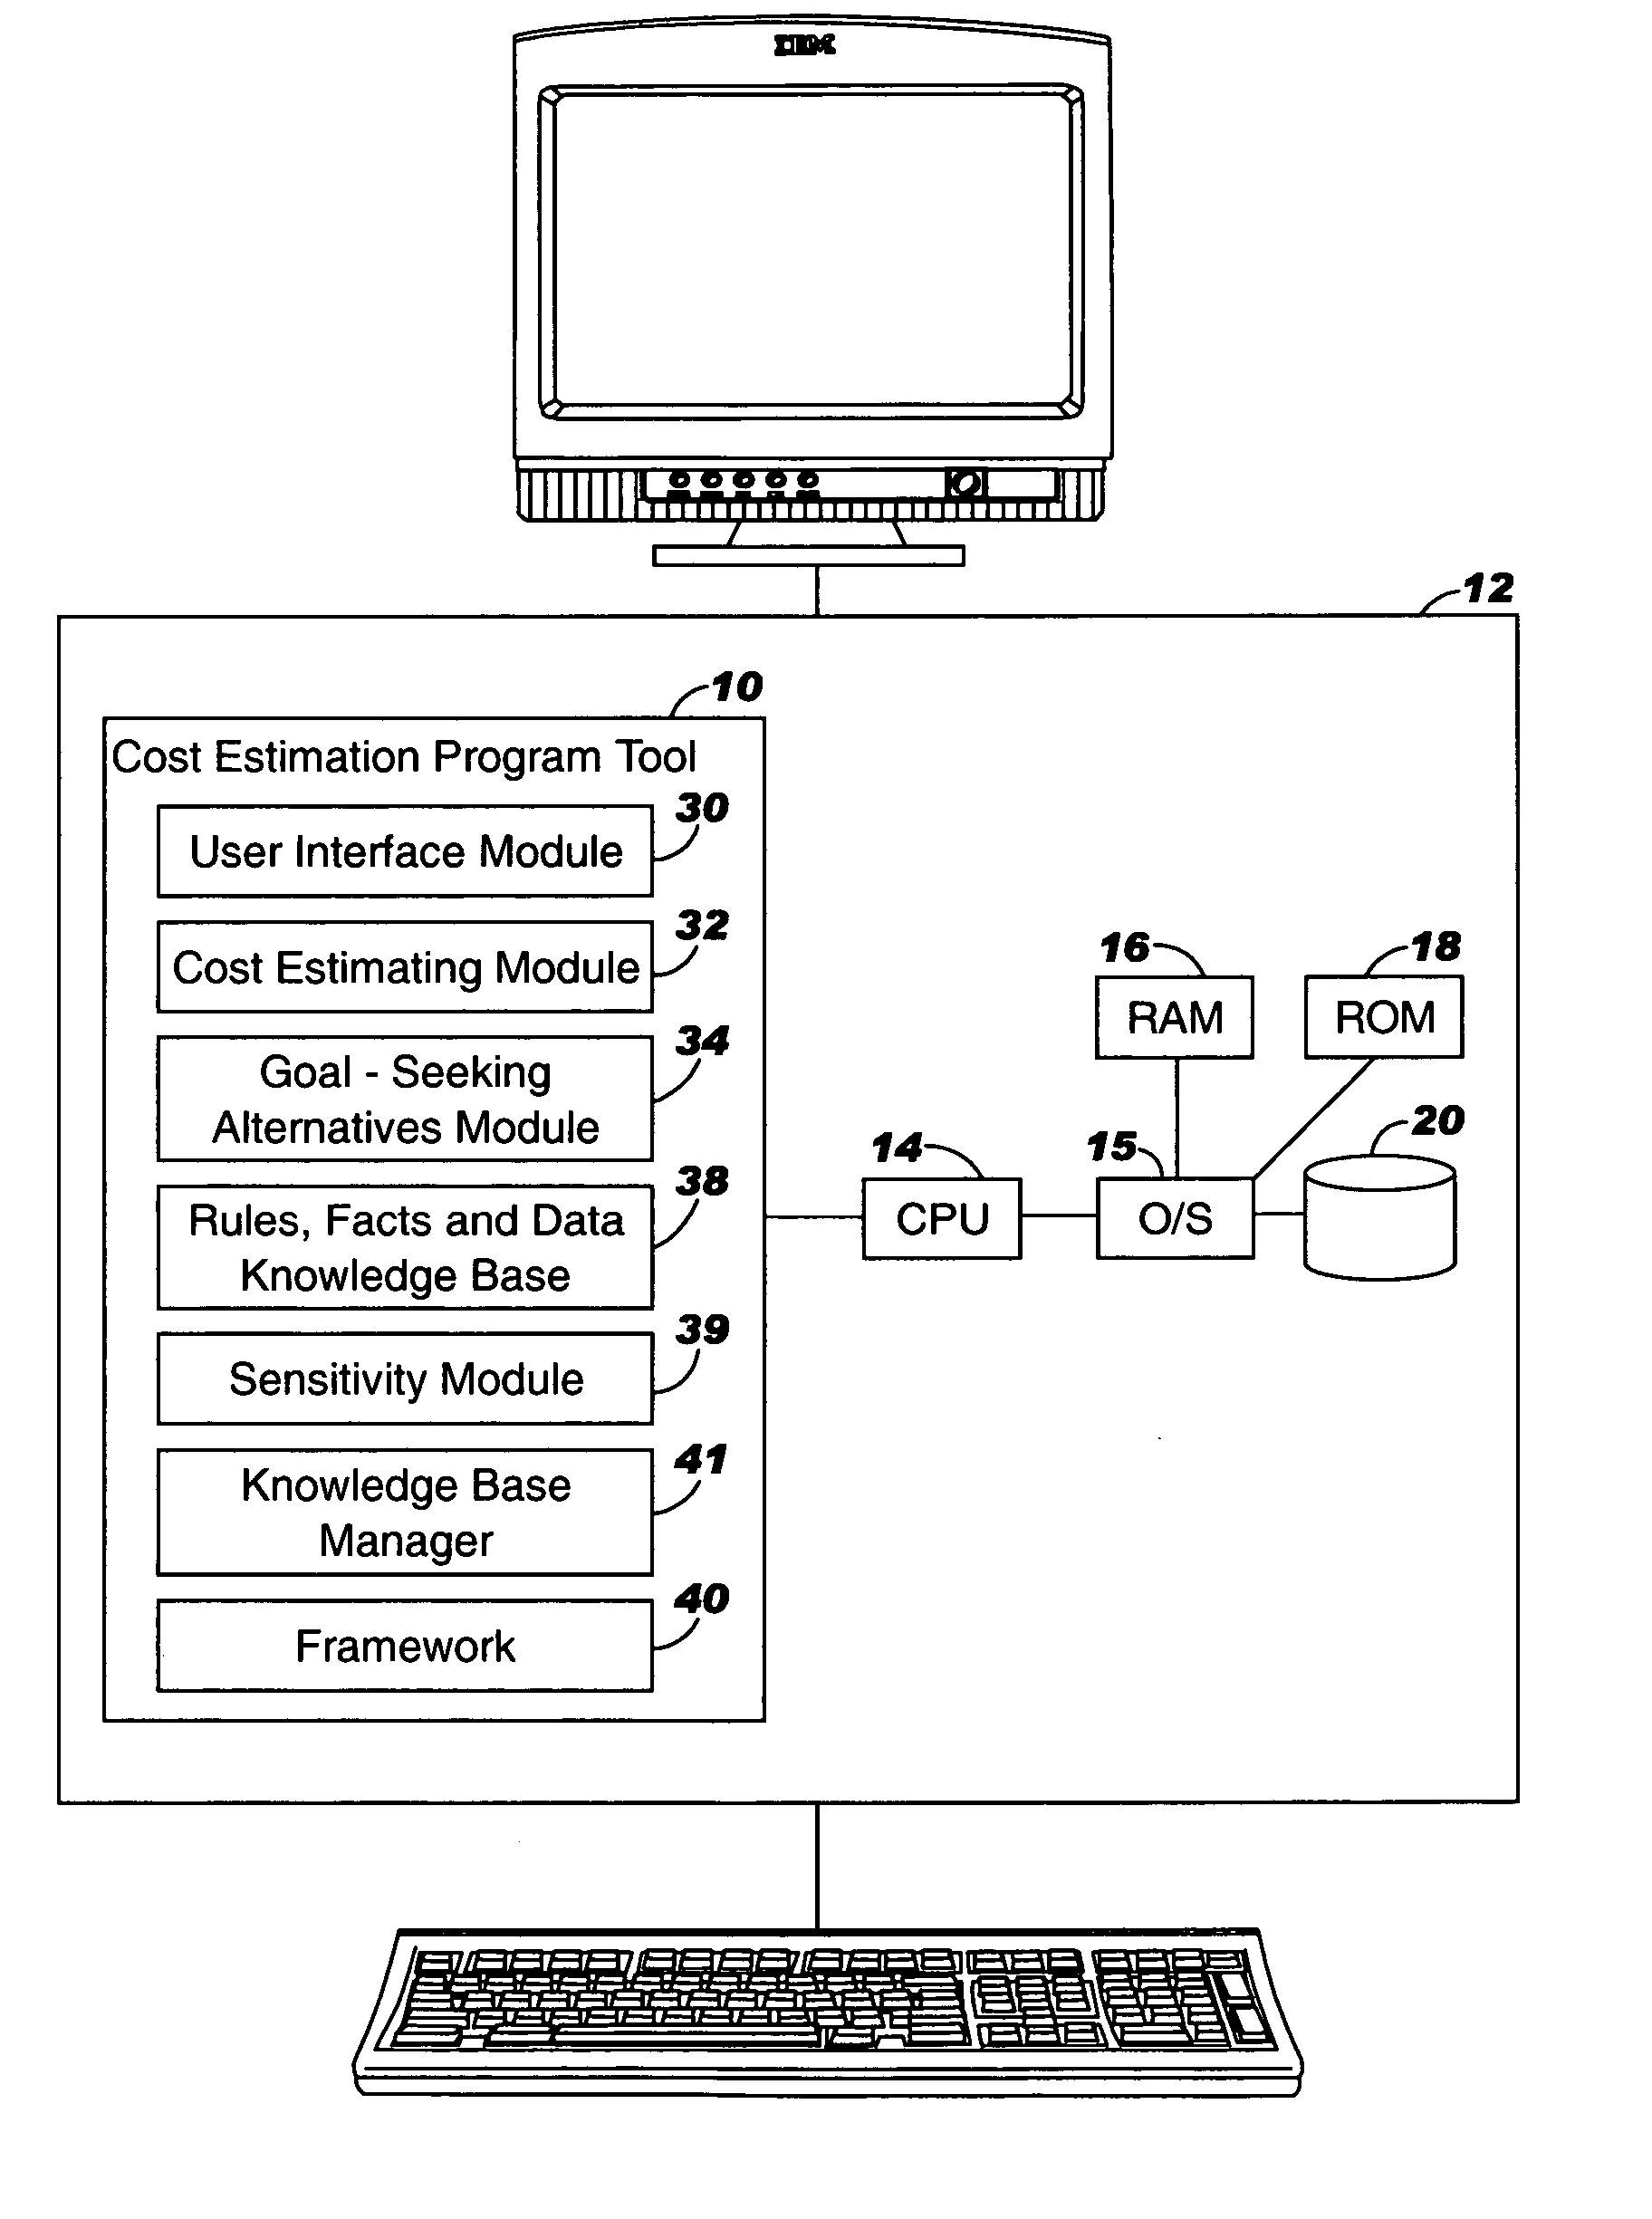 System, method and program to estimate cost of distributing software